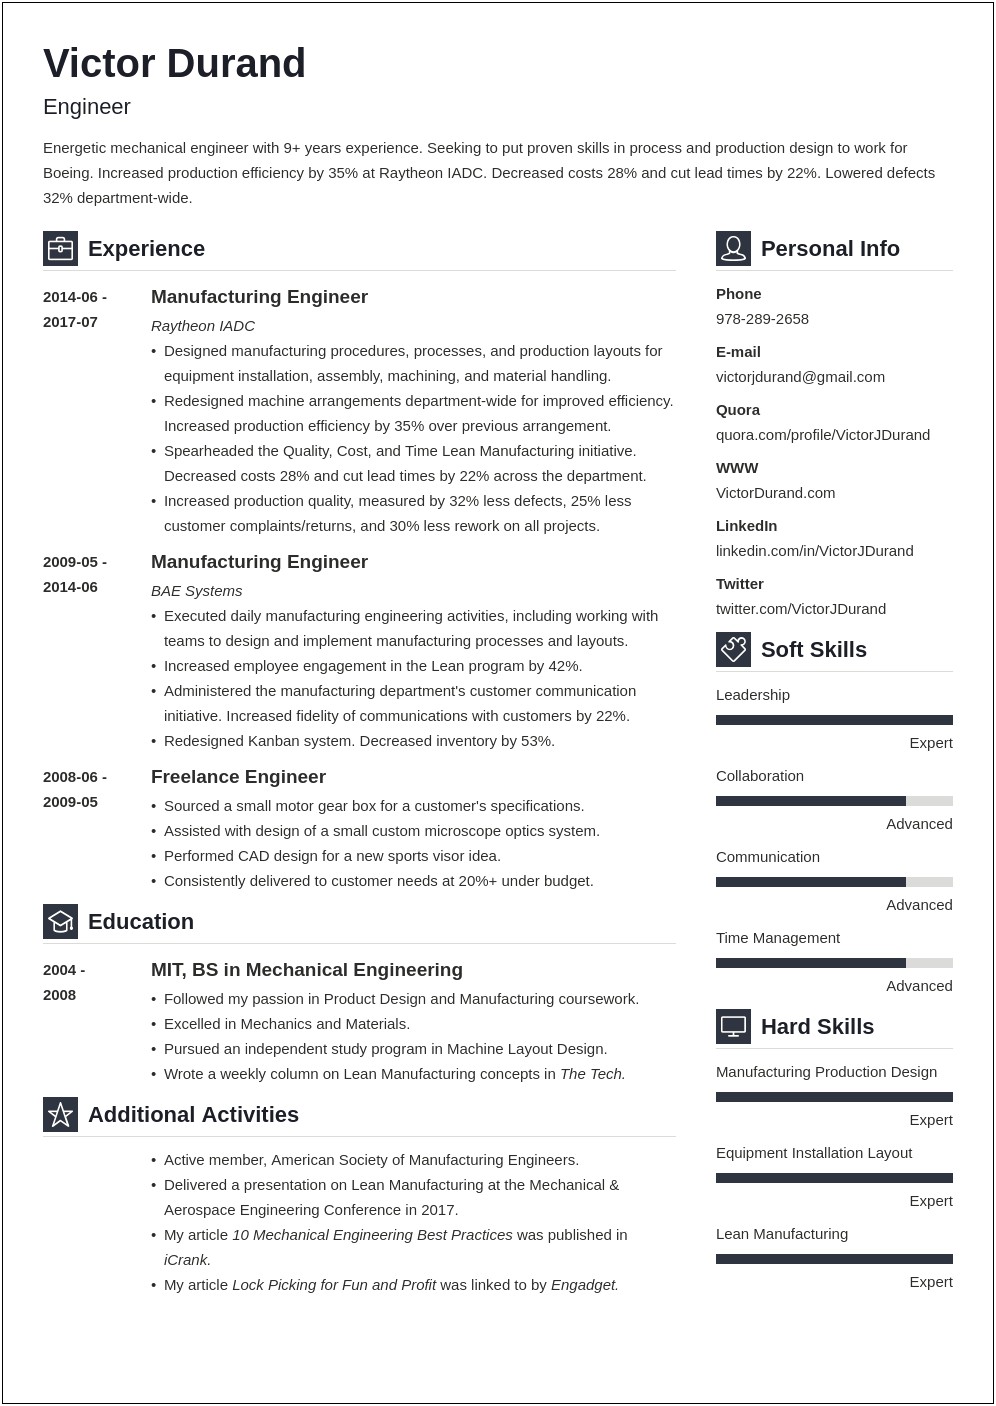 Resume For Engineer Entry Level Exampl